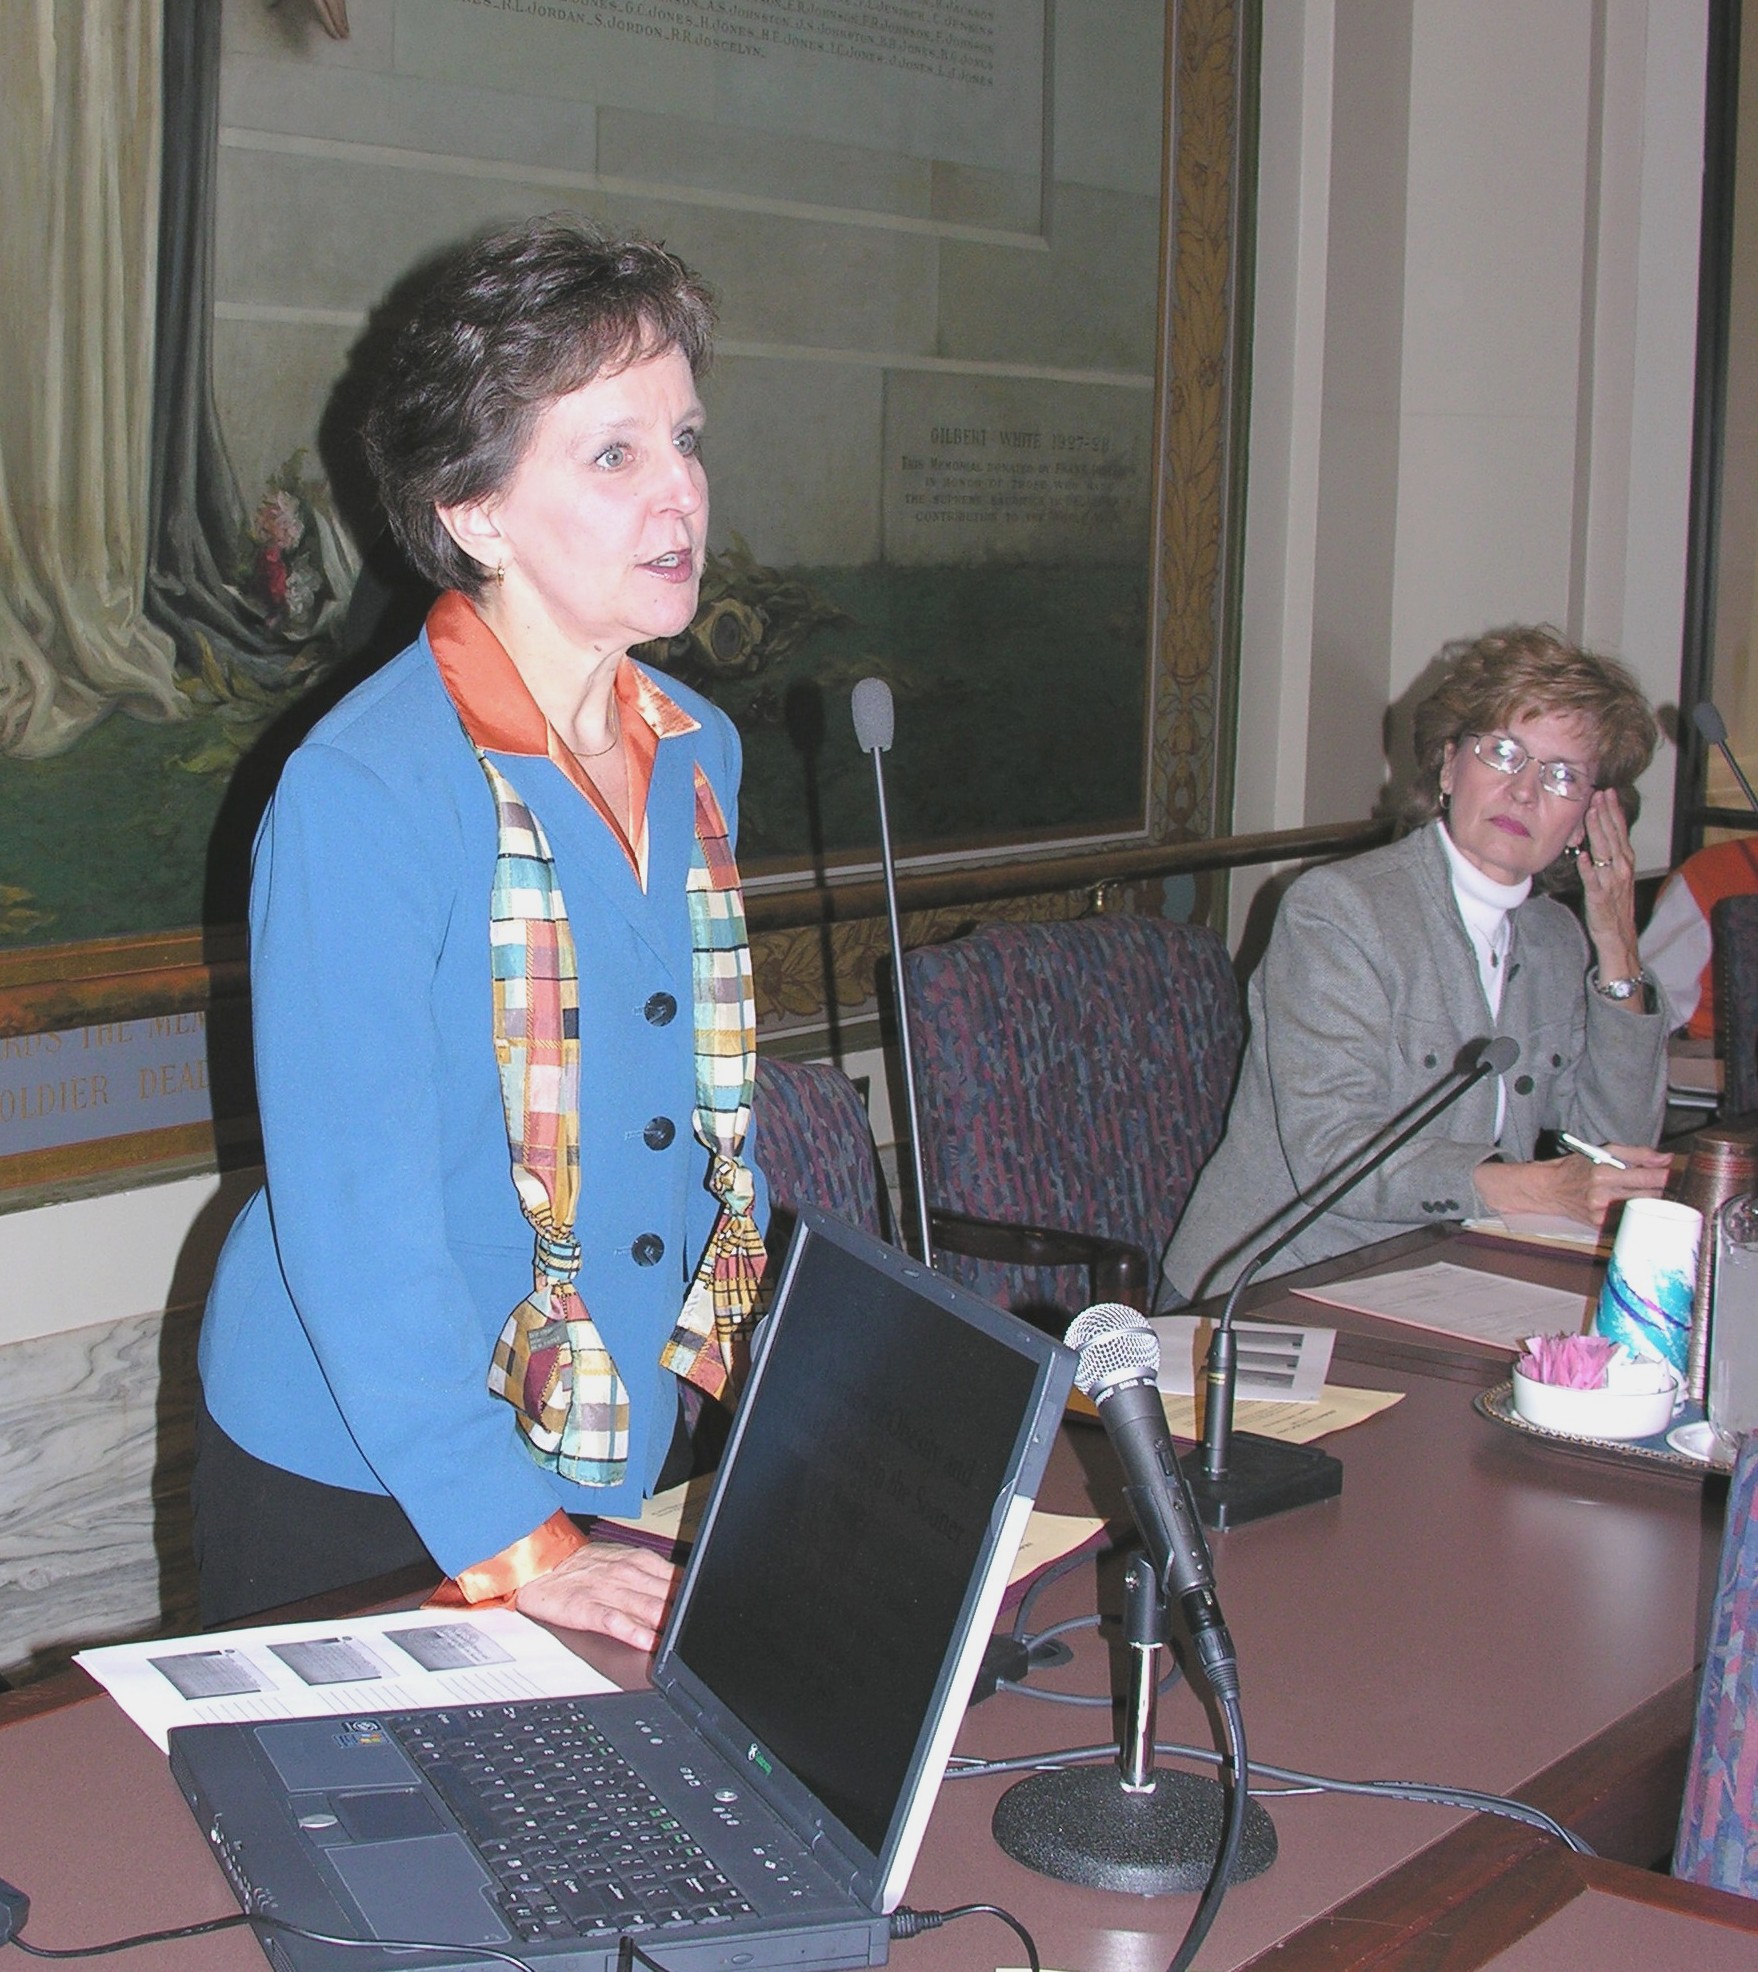 Ann Roberts, Executive Director of the Oklahoma Institute for Chlld Advocacy, testifies at a Senate hearing on the benefits of Farm-to-School.